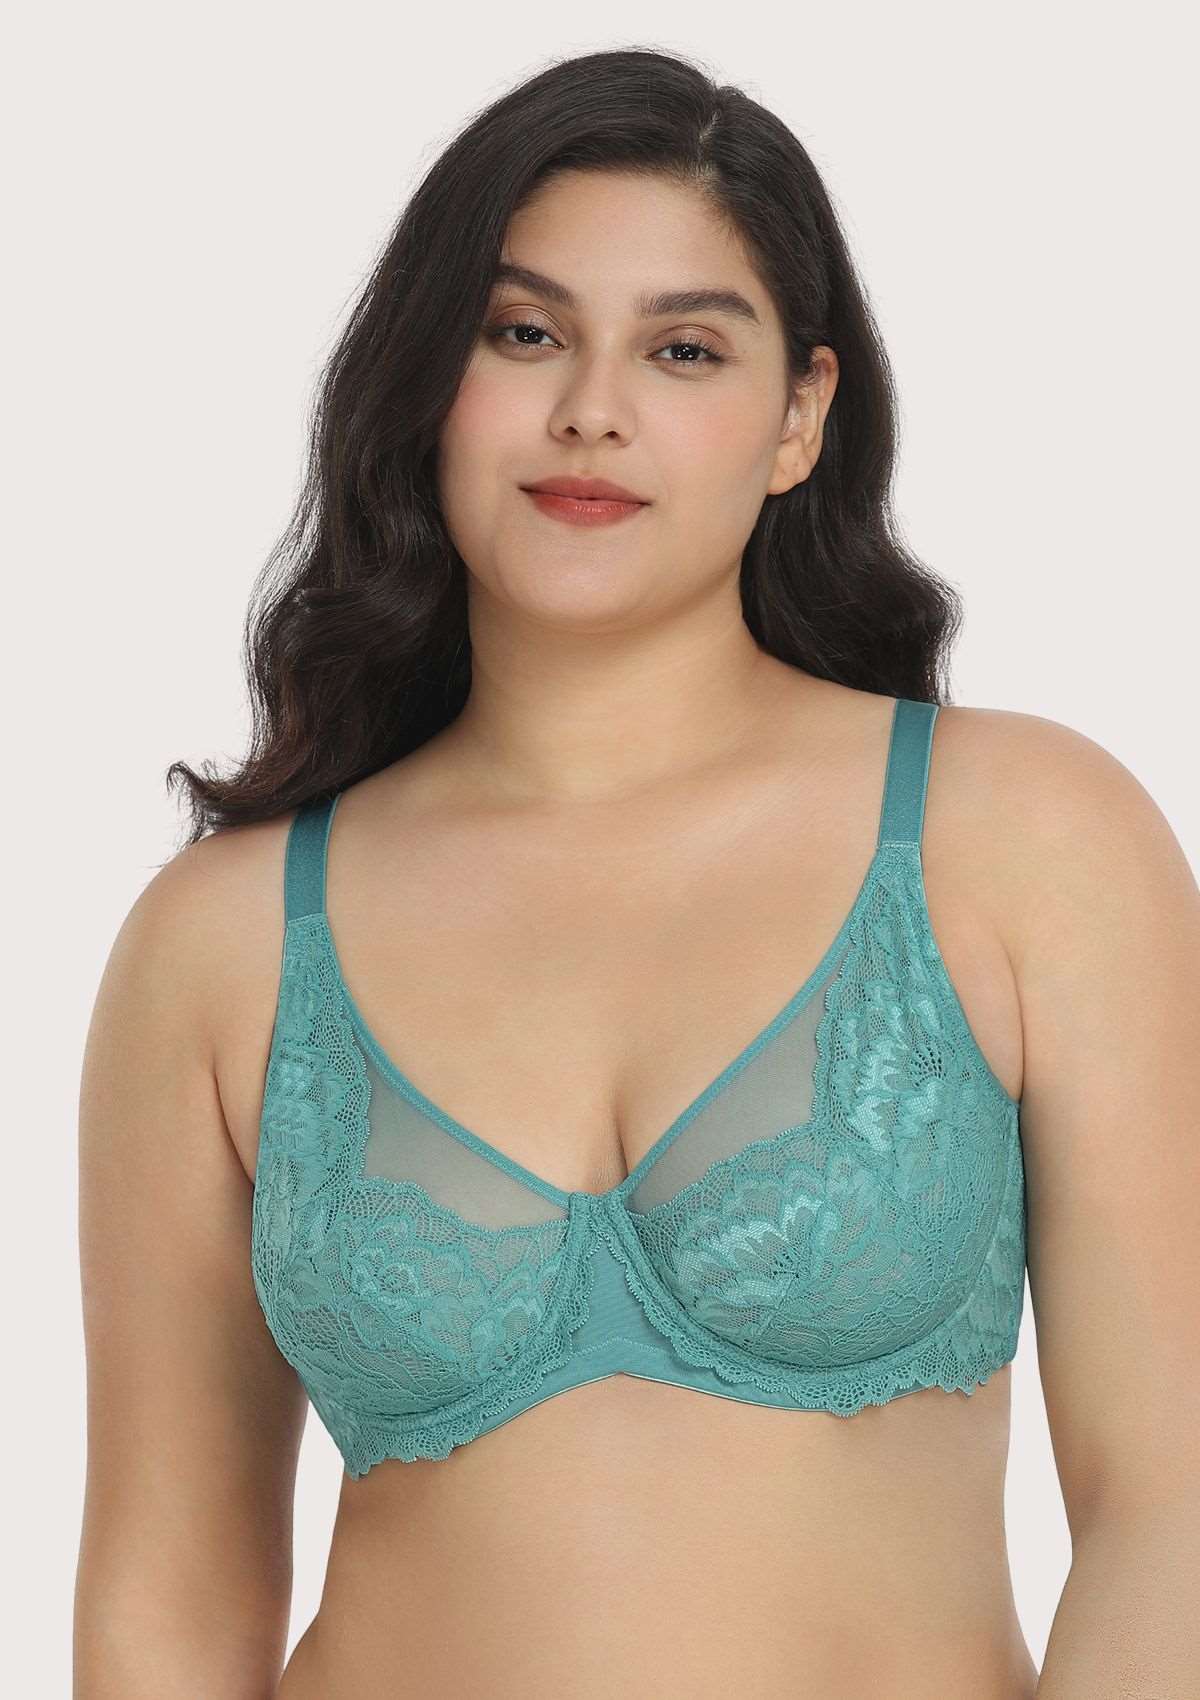 HSIA Paeonia Lace Full Coverage Underwire Non-Padded Uplifting Bra - Light Coral / 36 / DDD/F